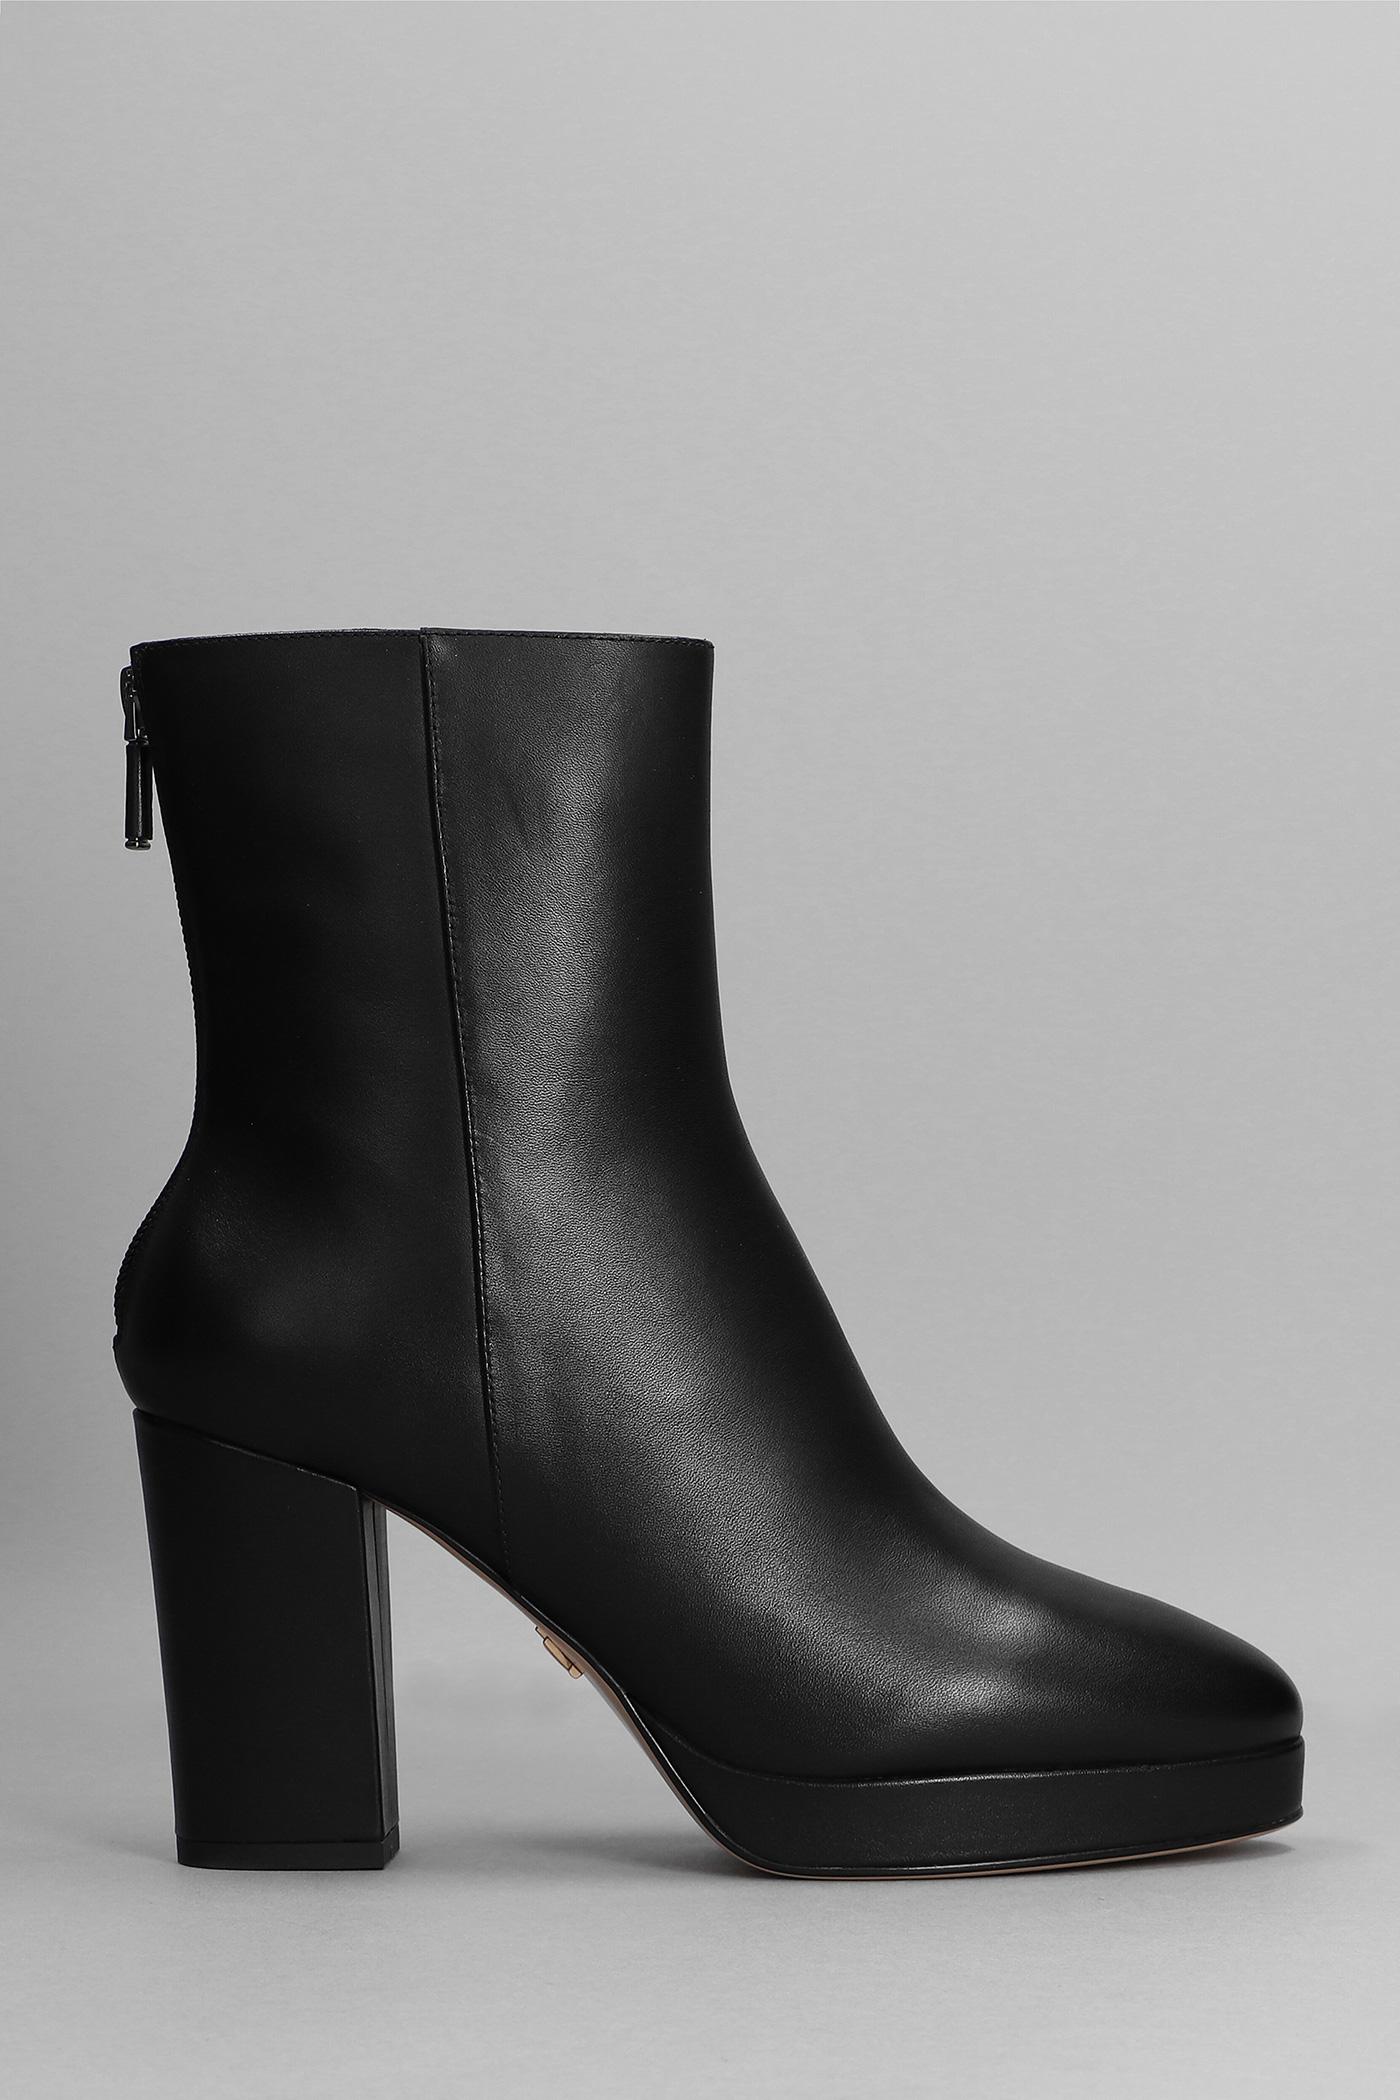 Lola Cruz High Heels Ankle Boots In Black Leather | Lyst